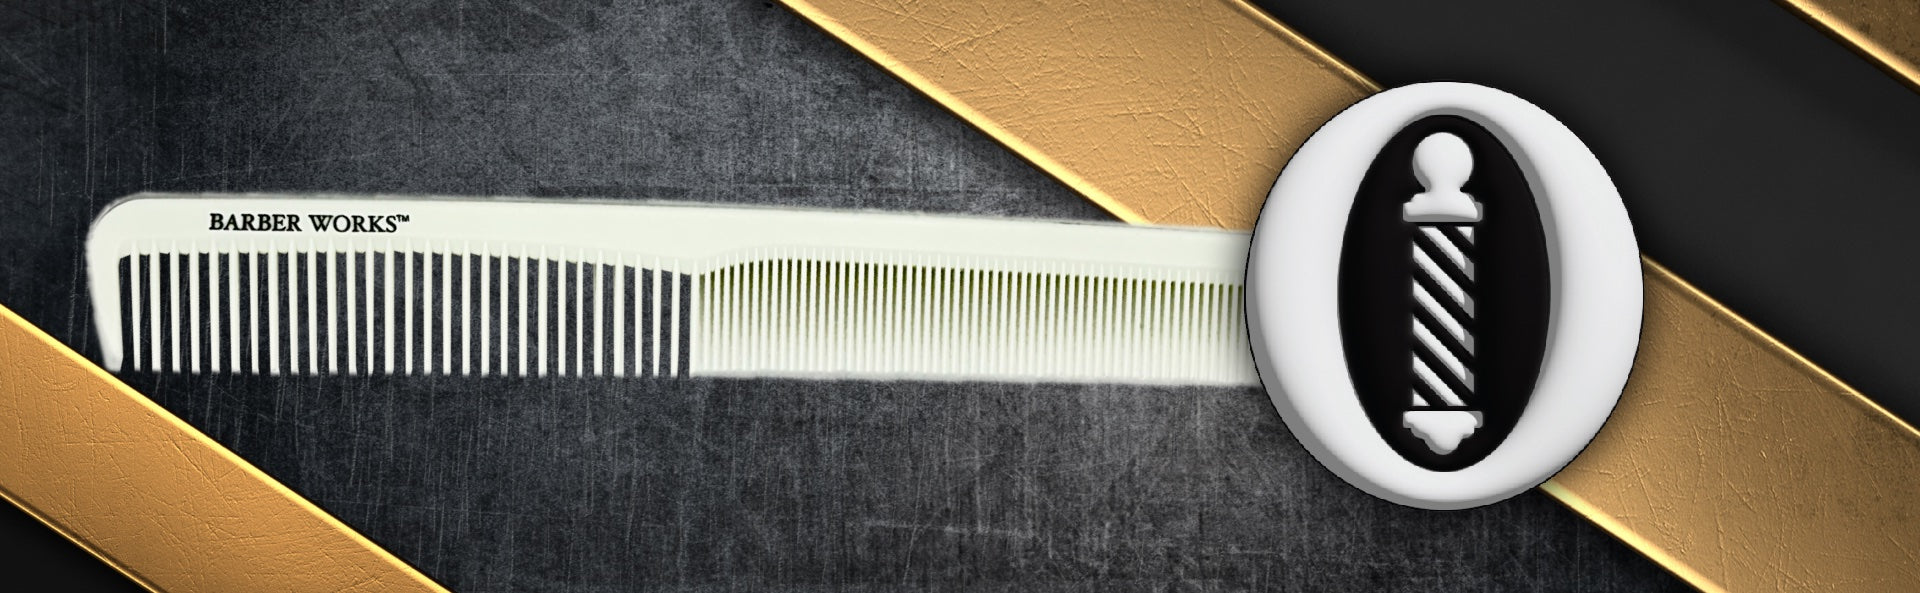 Barber Works 7-inch Narrow Styling Comb, ideal for detailed hairstyling, made from durable ceramic and lightweight ABS plastic